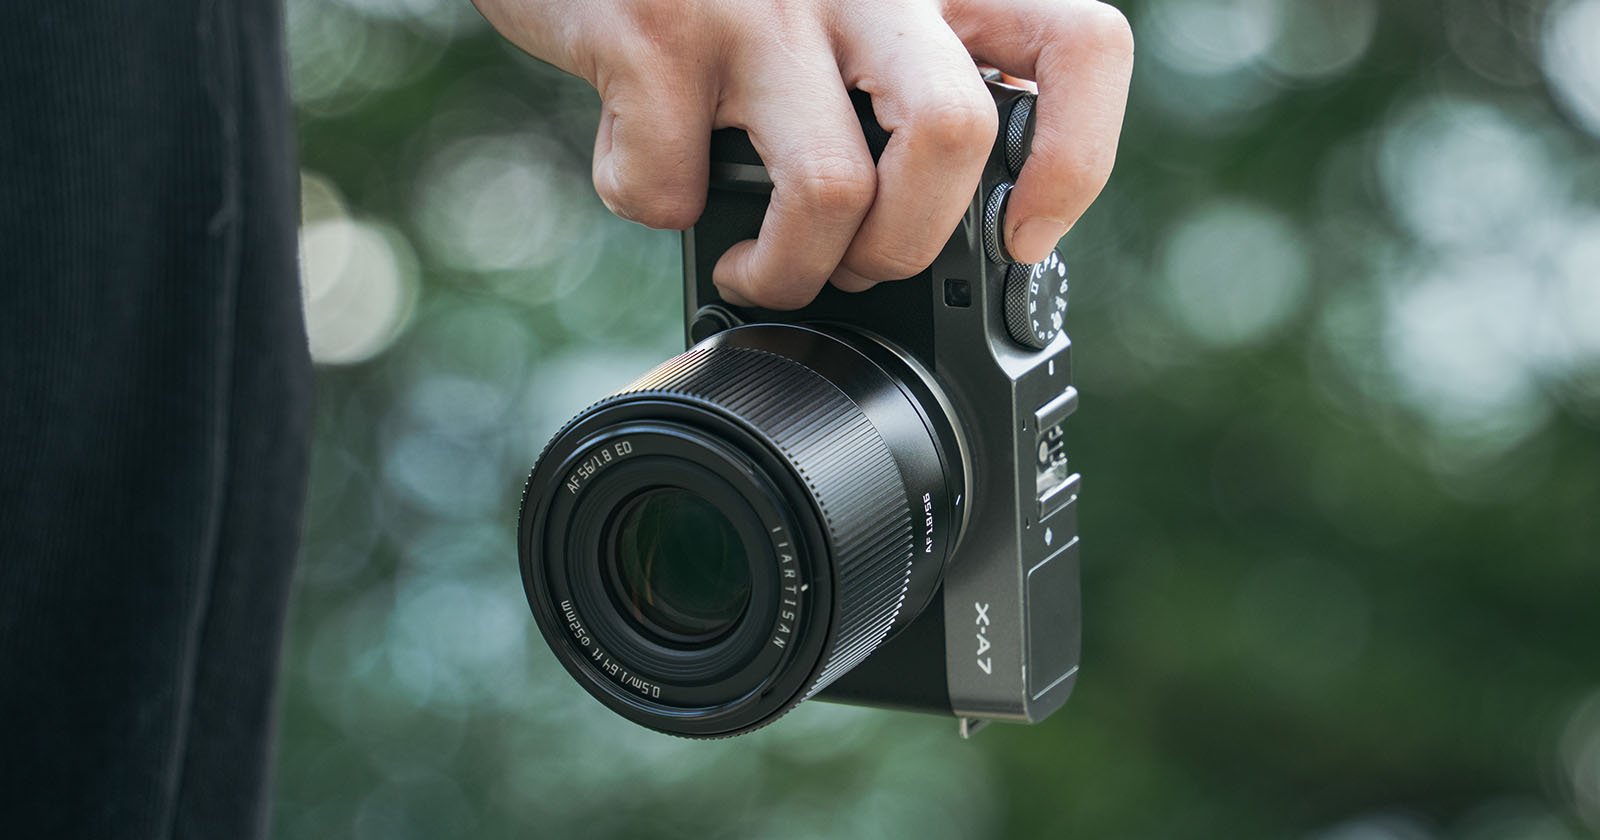 A close-up of a person's hand holding a modern camera by its strap, with a blurred green background. the camera is oriented with the lens facing forward.